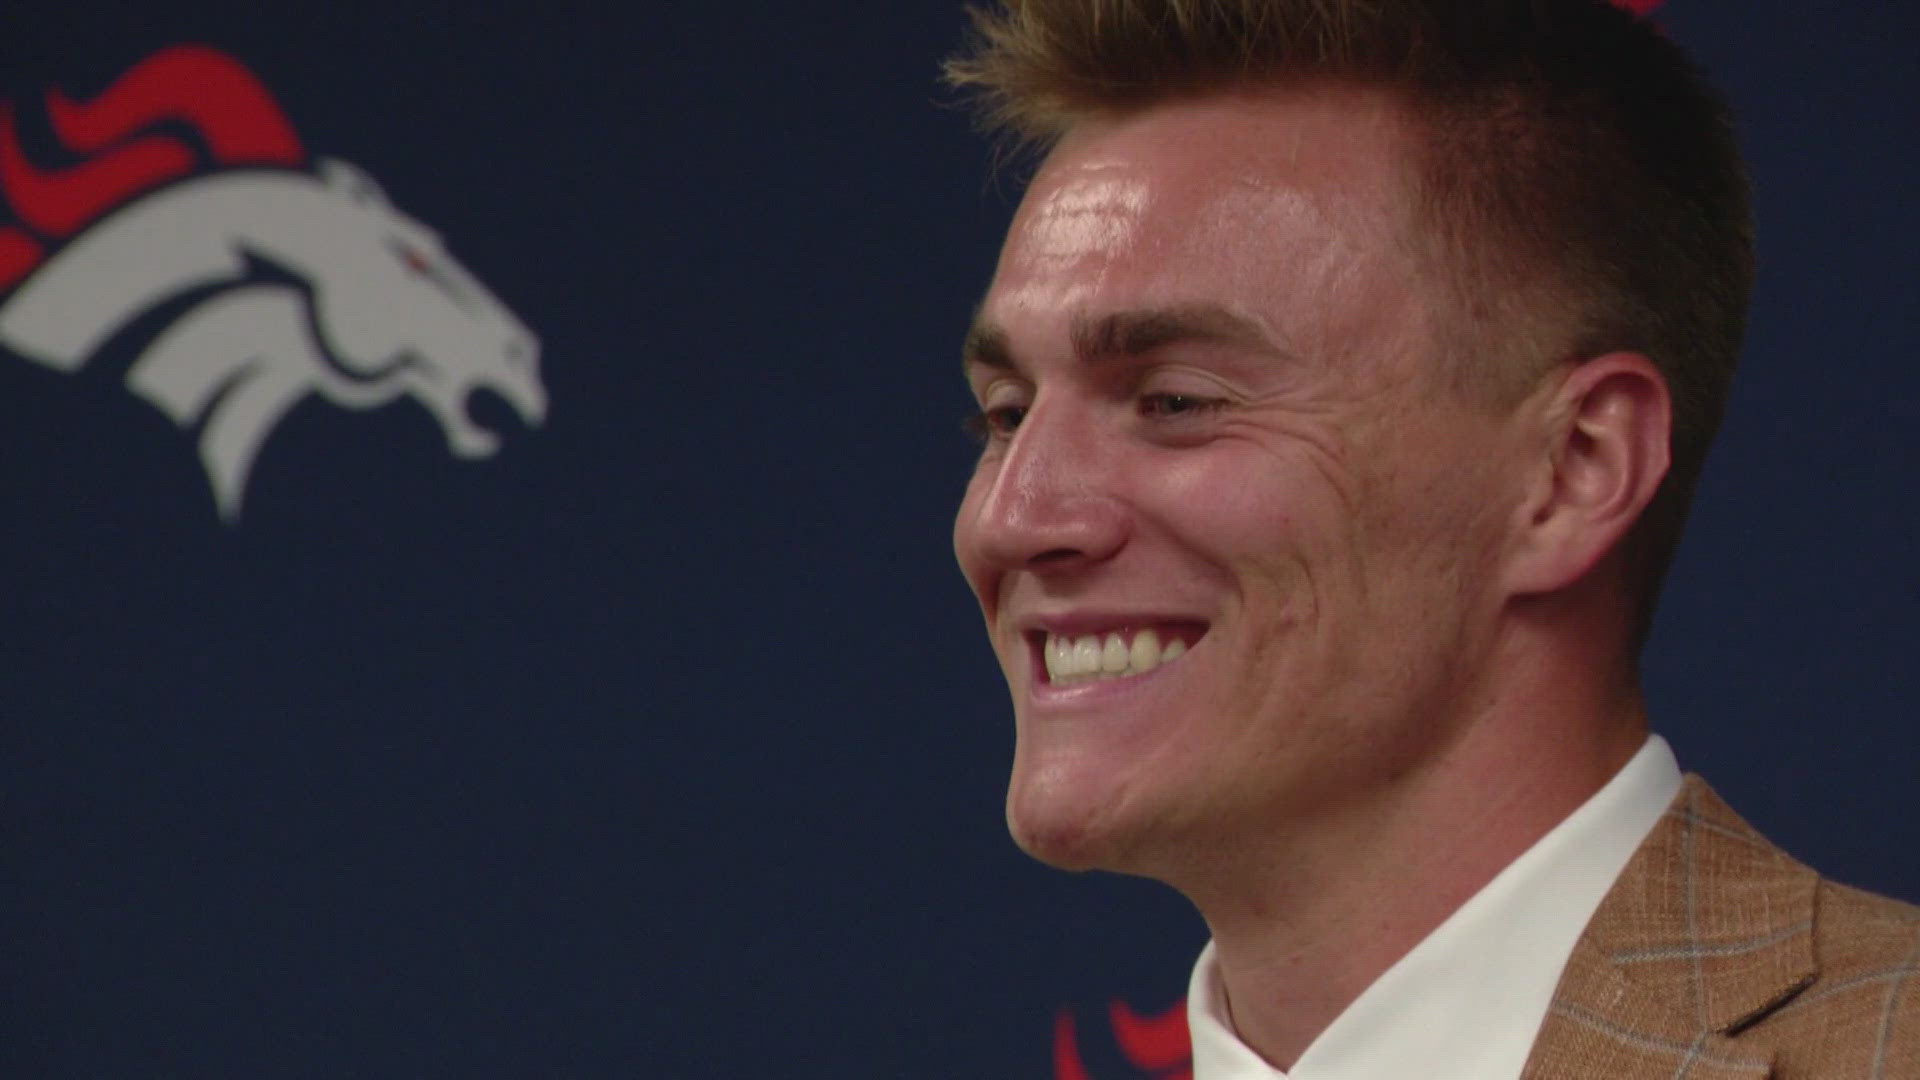 Bo Nix was officially introduced as the Broncos newest QB at a news conference Friday afternoon.